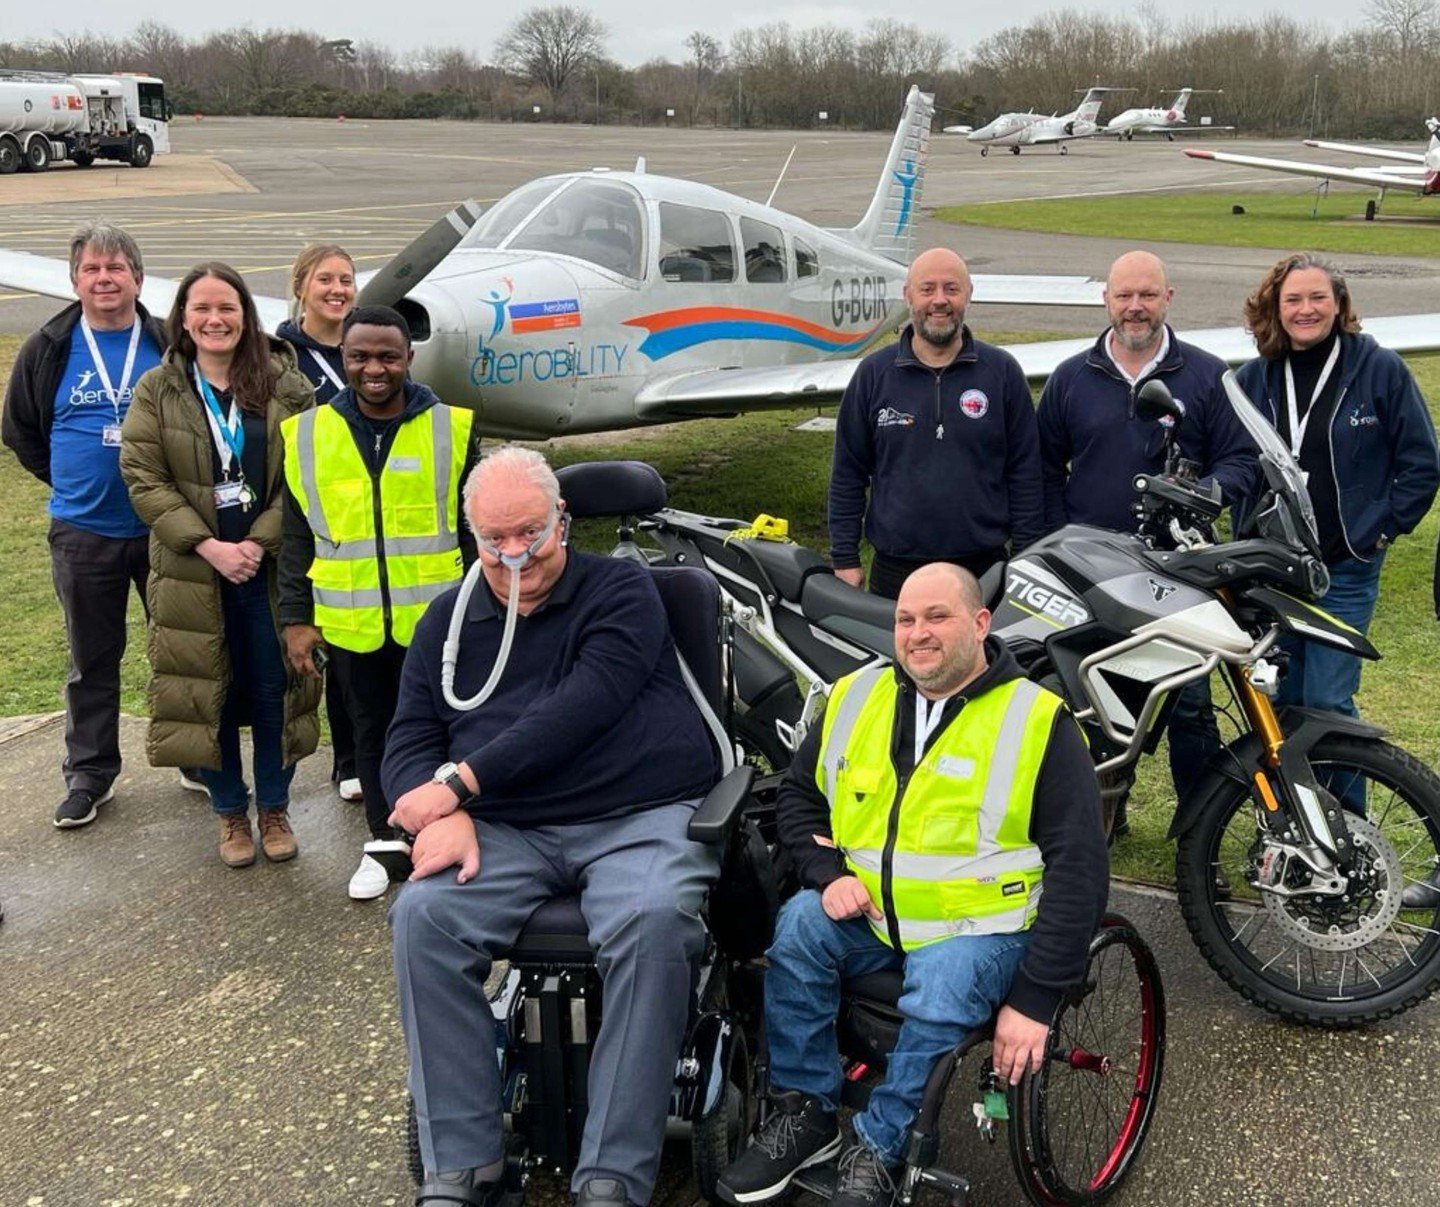 We've got a busy week ahead here at Aerobility!

We're cheering on the @TheBigTour24in24 team as they embark on their fundraising adventure for Aerobility and Prostate Cancer UK this week. Here is a picture of us with the riders earlier this year. Be